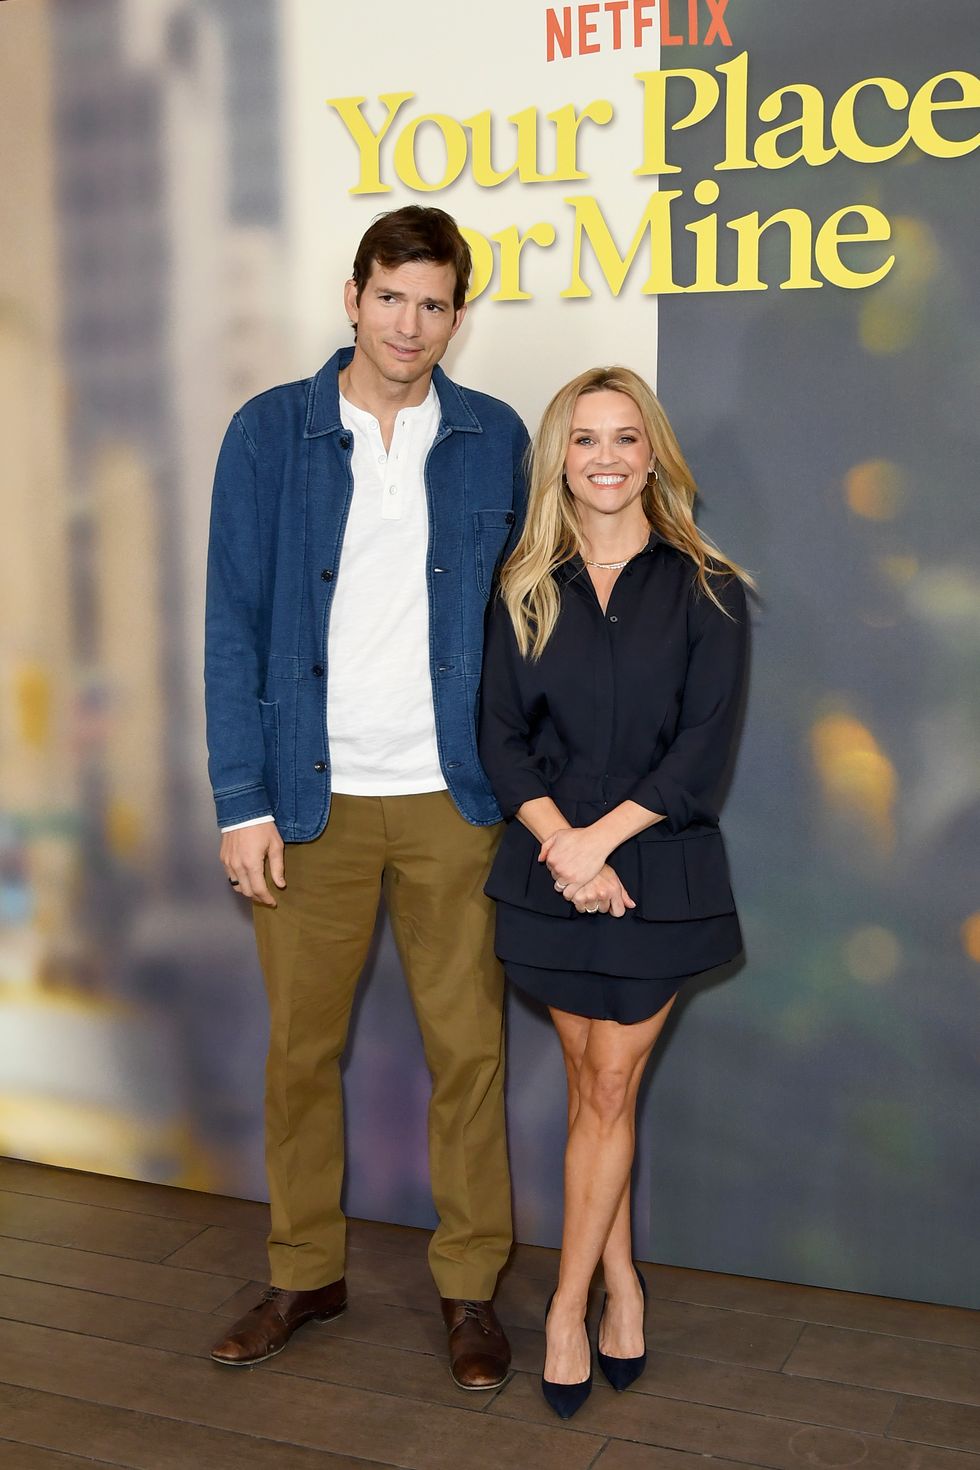 photocall for netflix's "your place or mine"